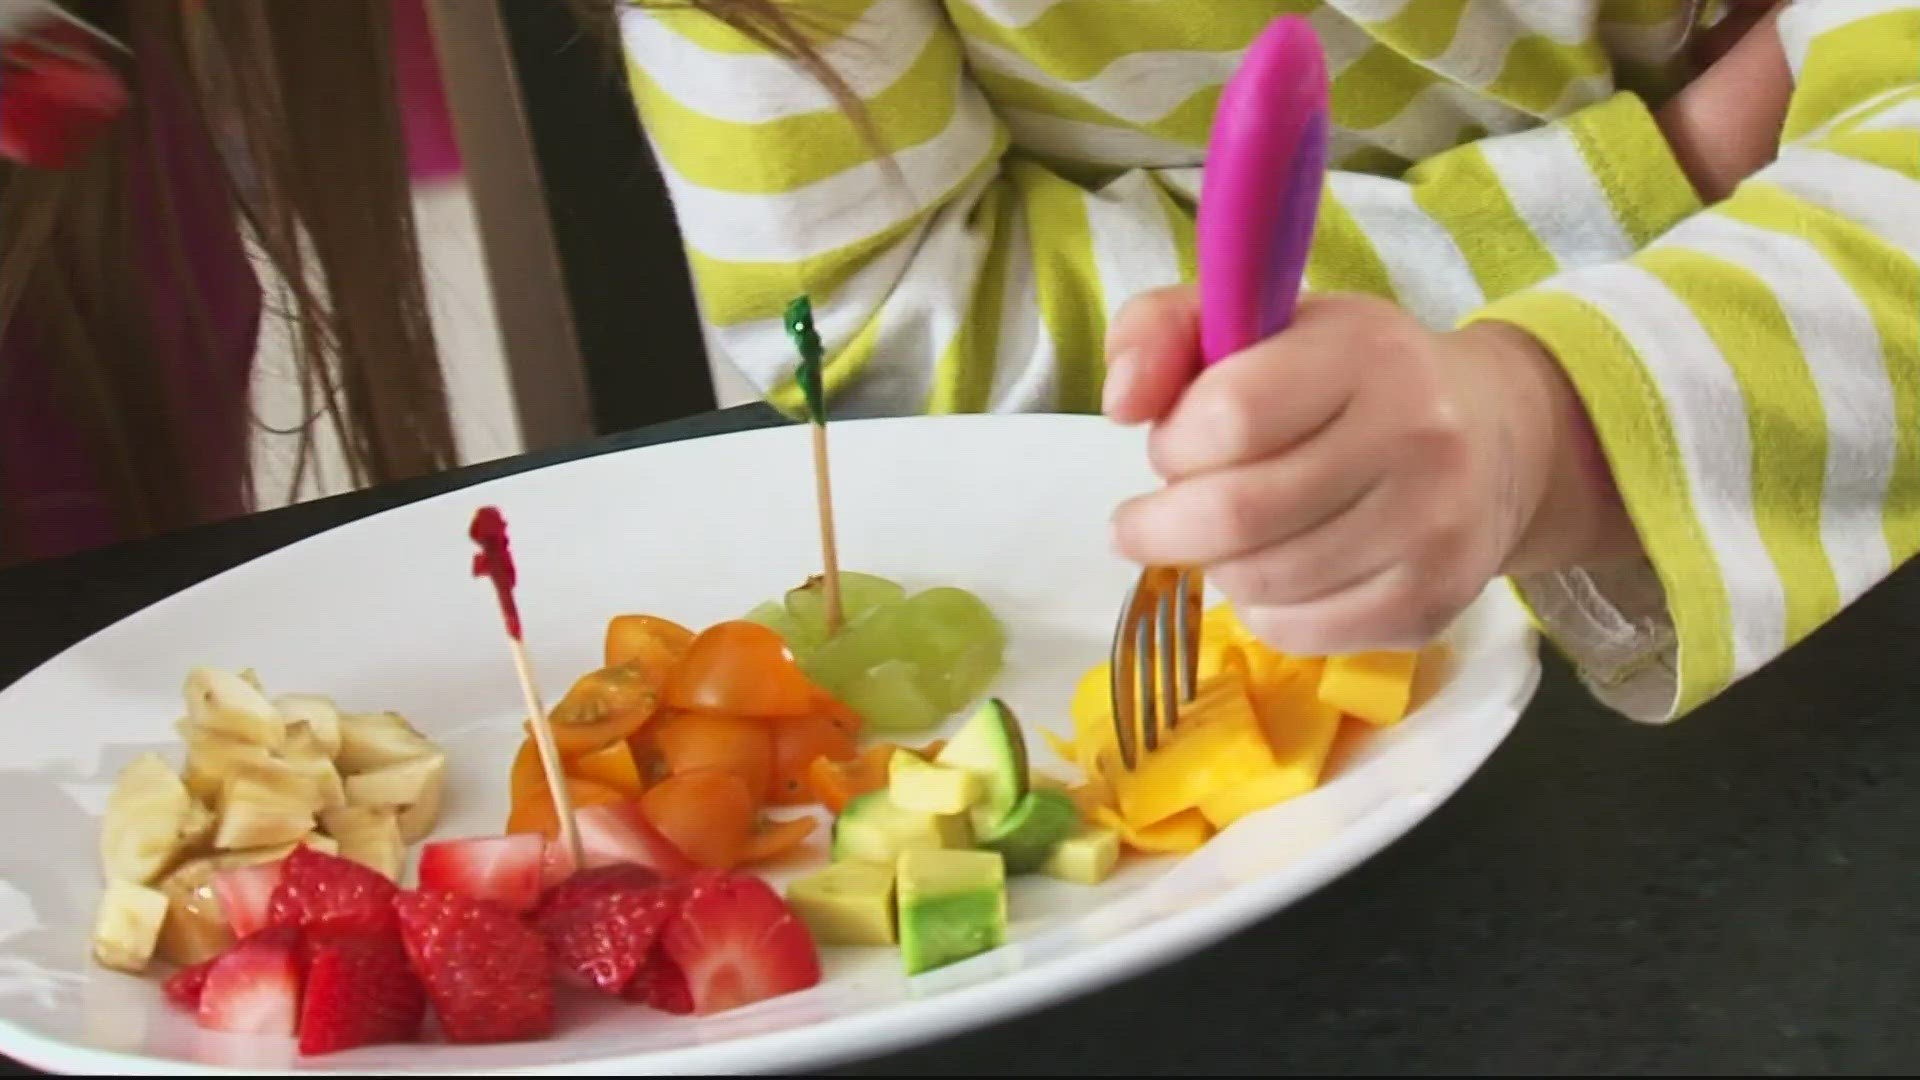 Restaurants in Montgomery County will be required by law to provide at least one healthy meal option for children starting Wednesday.